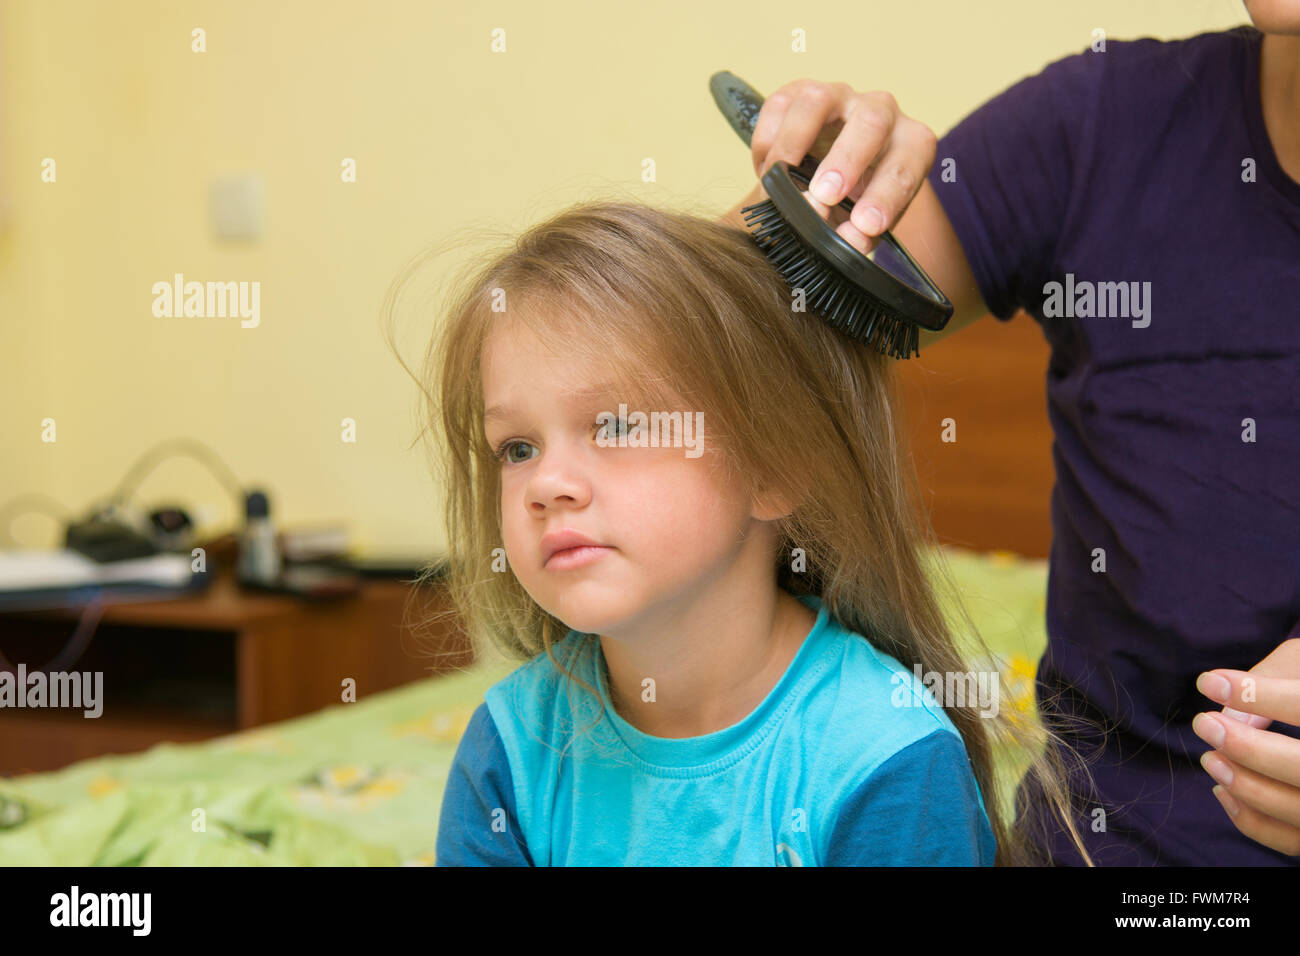 Little girl combing her long hair massage comb Stock Photo